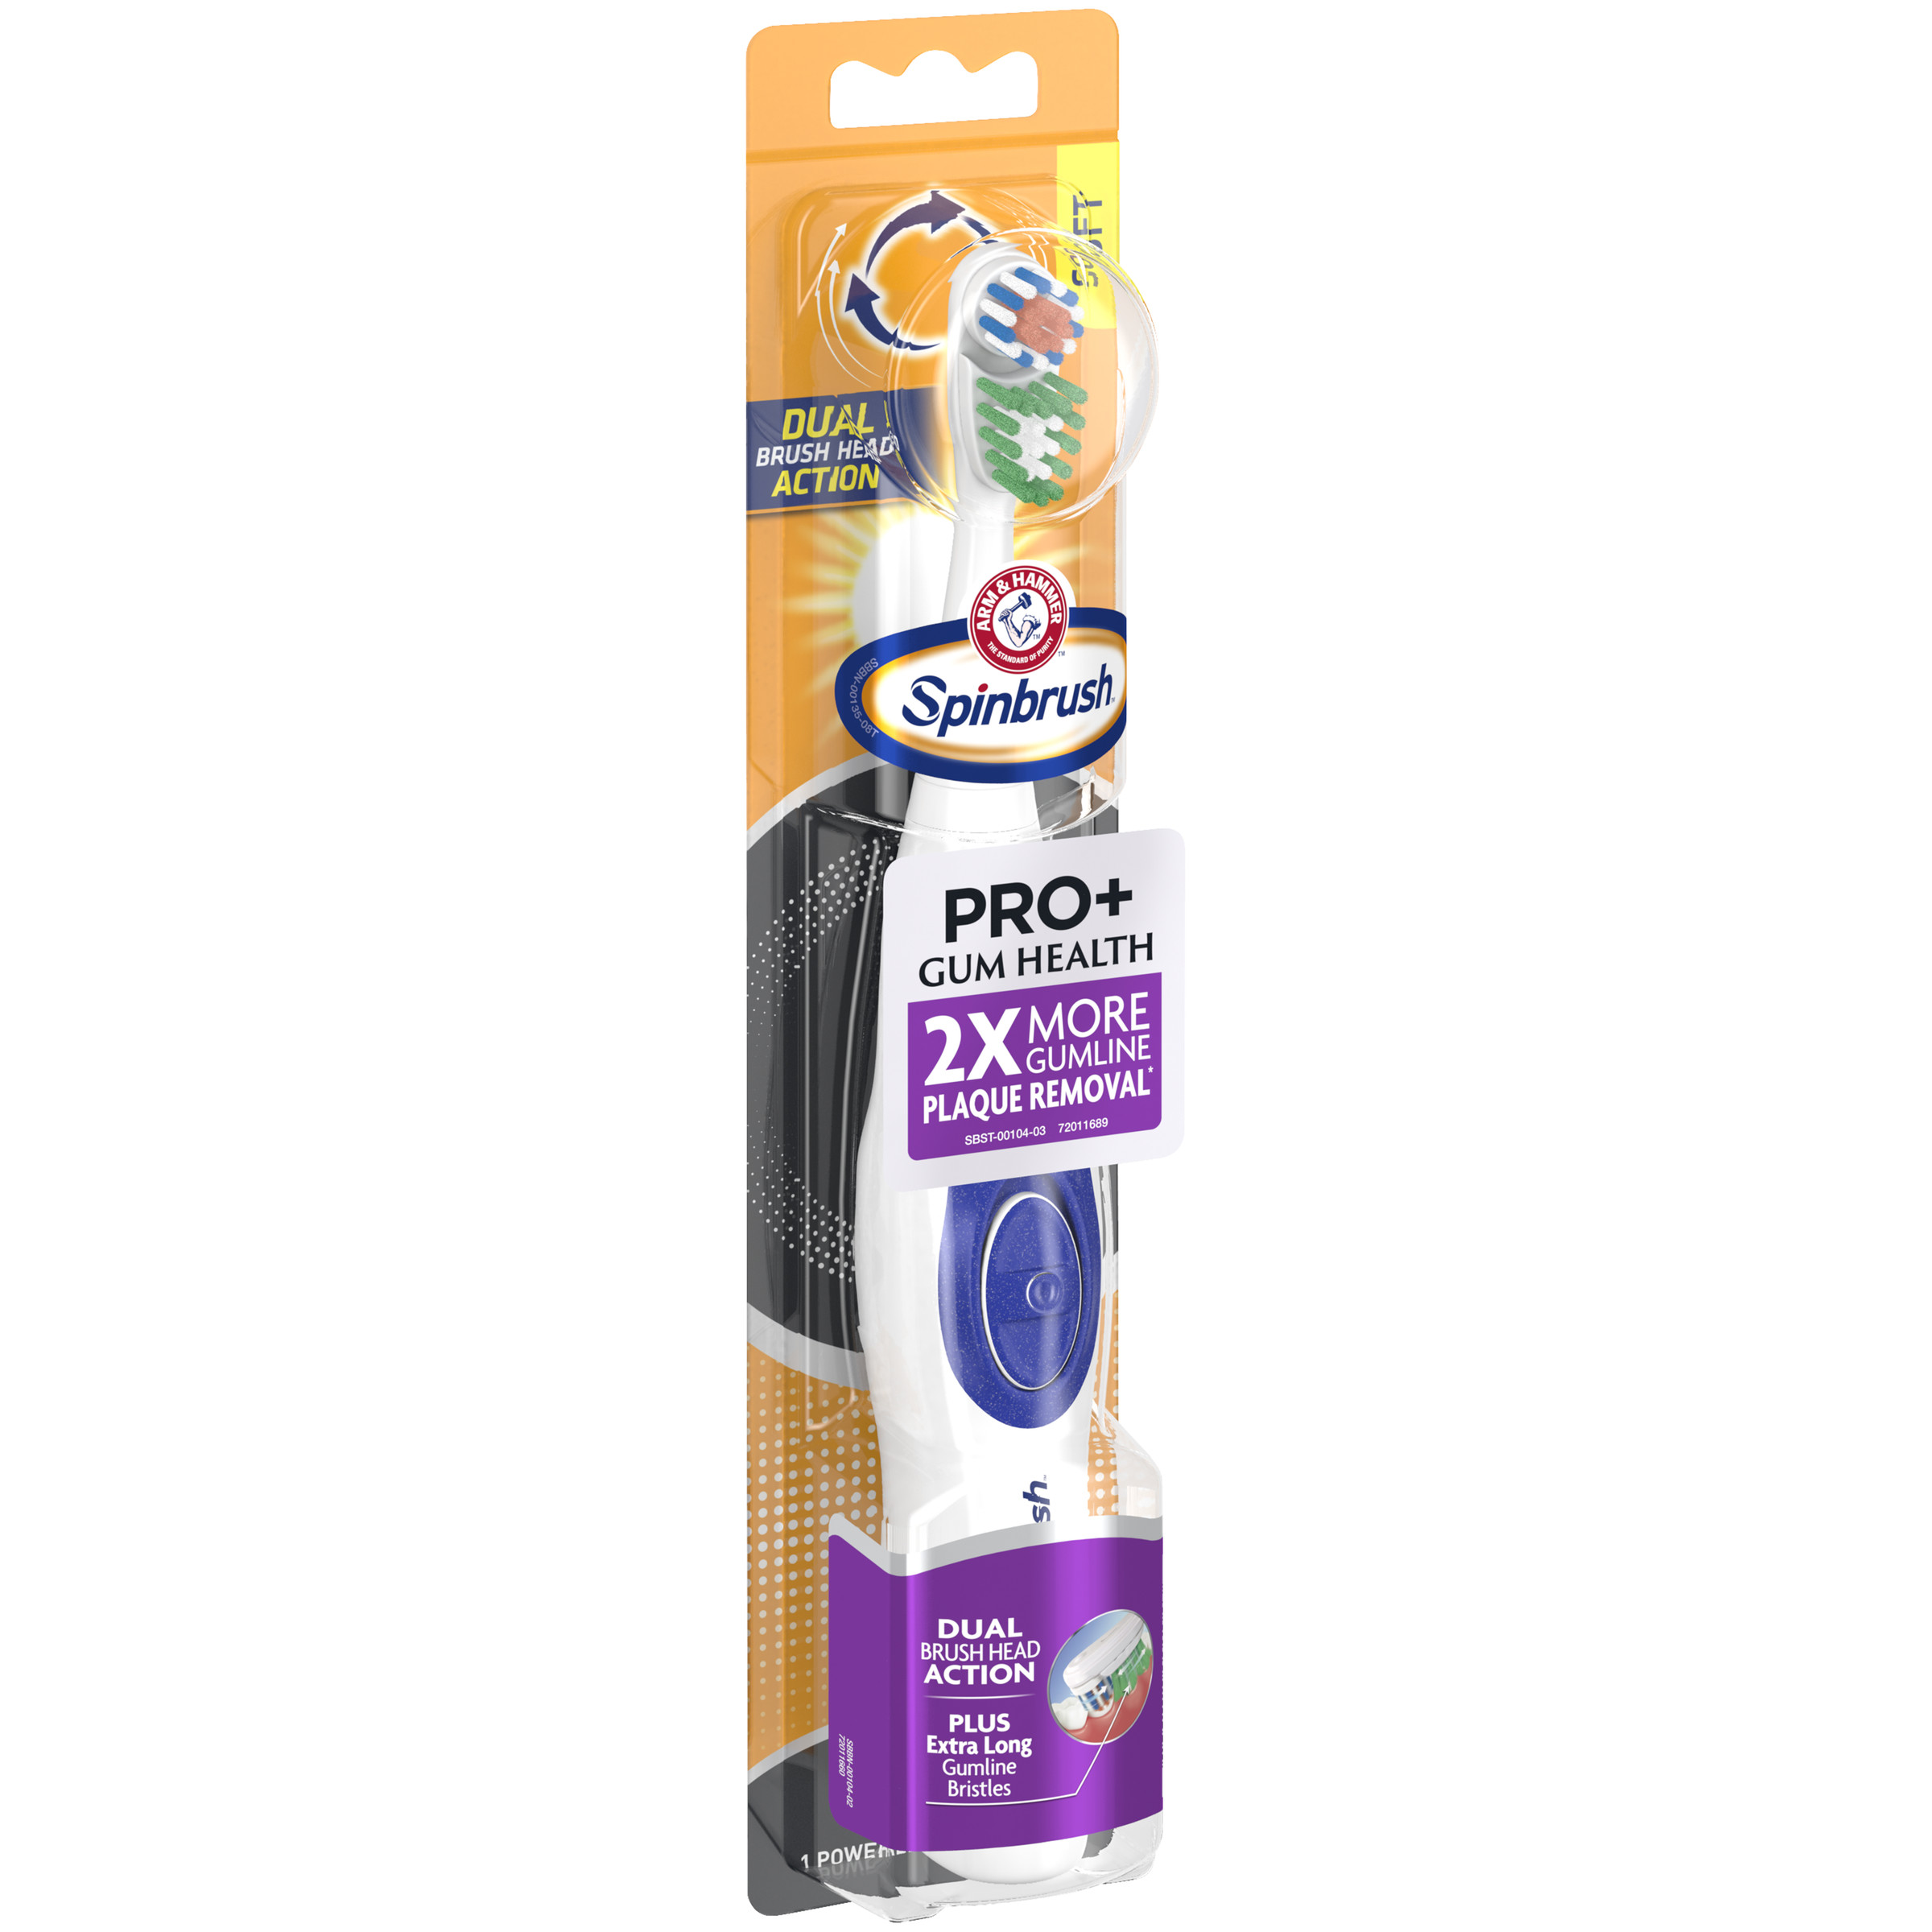 Spinbrush PRO+ Gum Health Battery Powered Toothbrush for Adults, Helps Plaque Removal, Soft Bristles - image 3 of 8